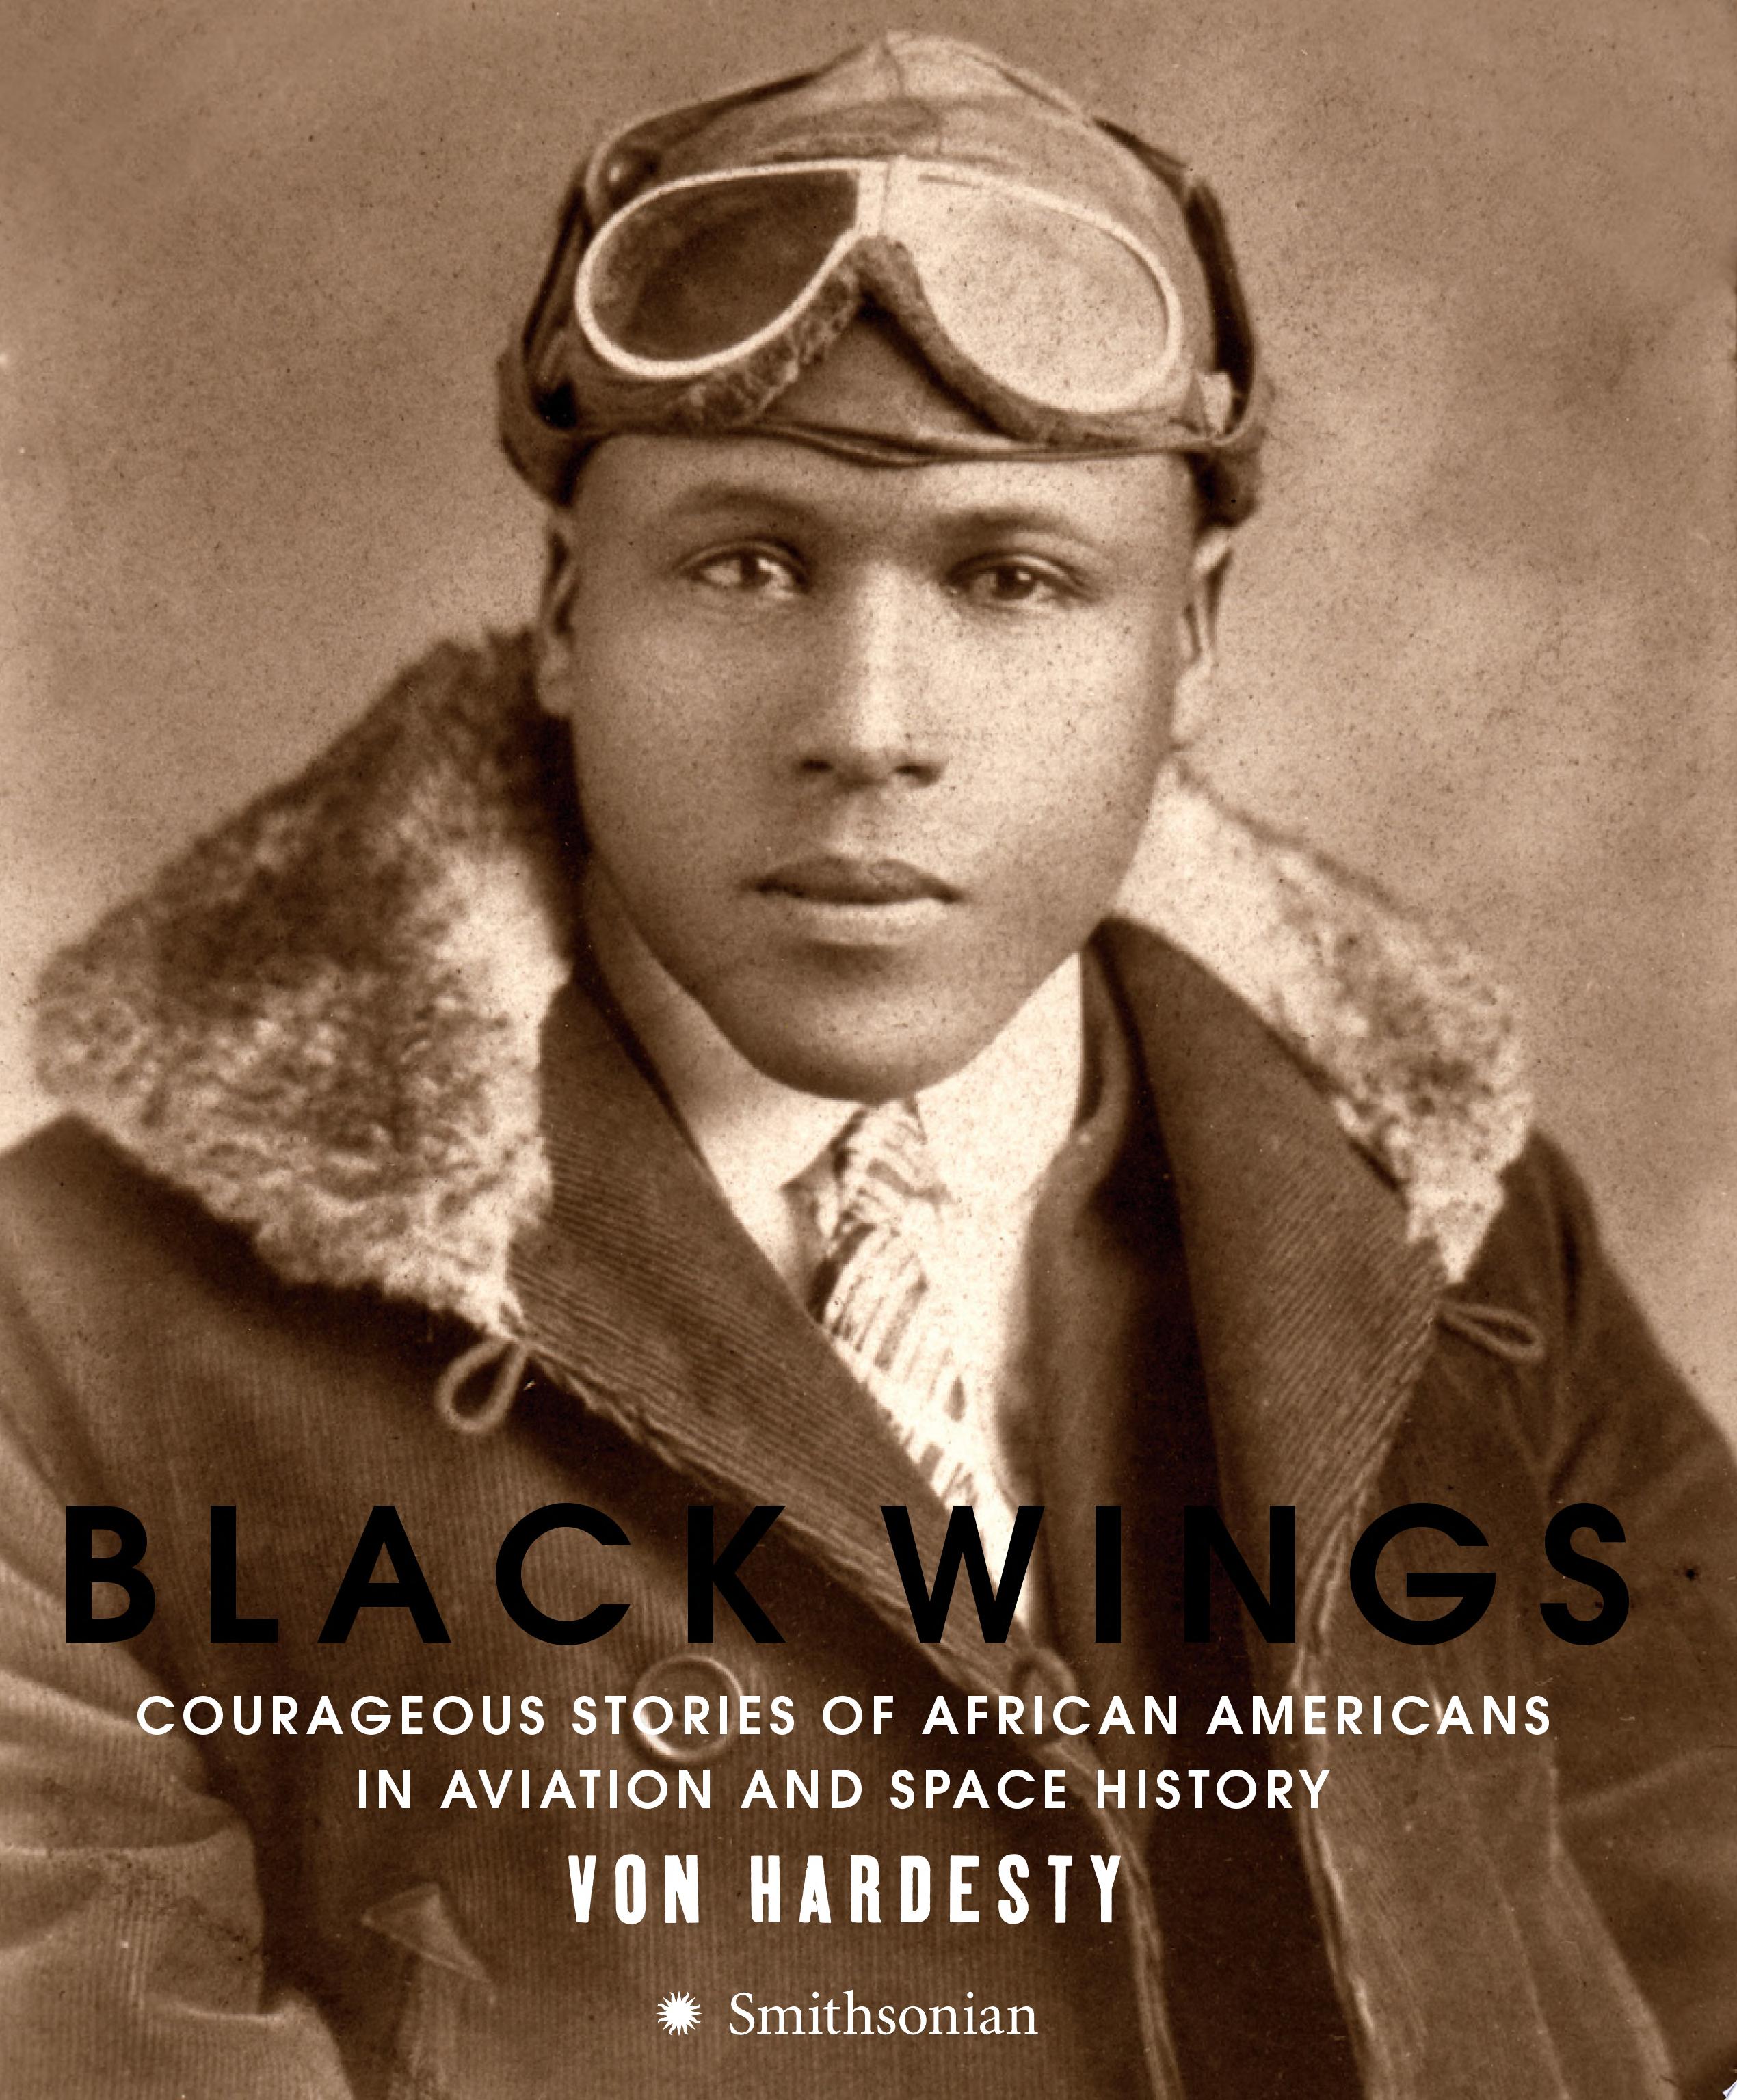 Image for "Black Wings"